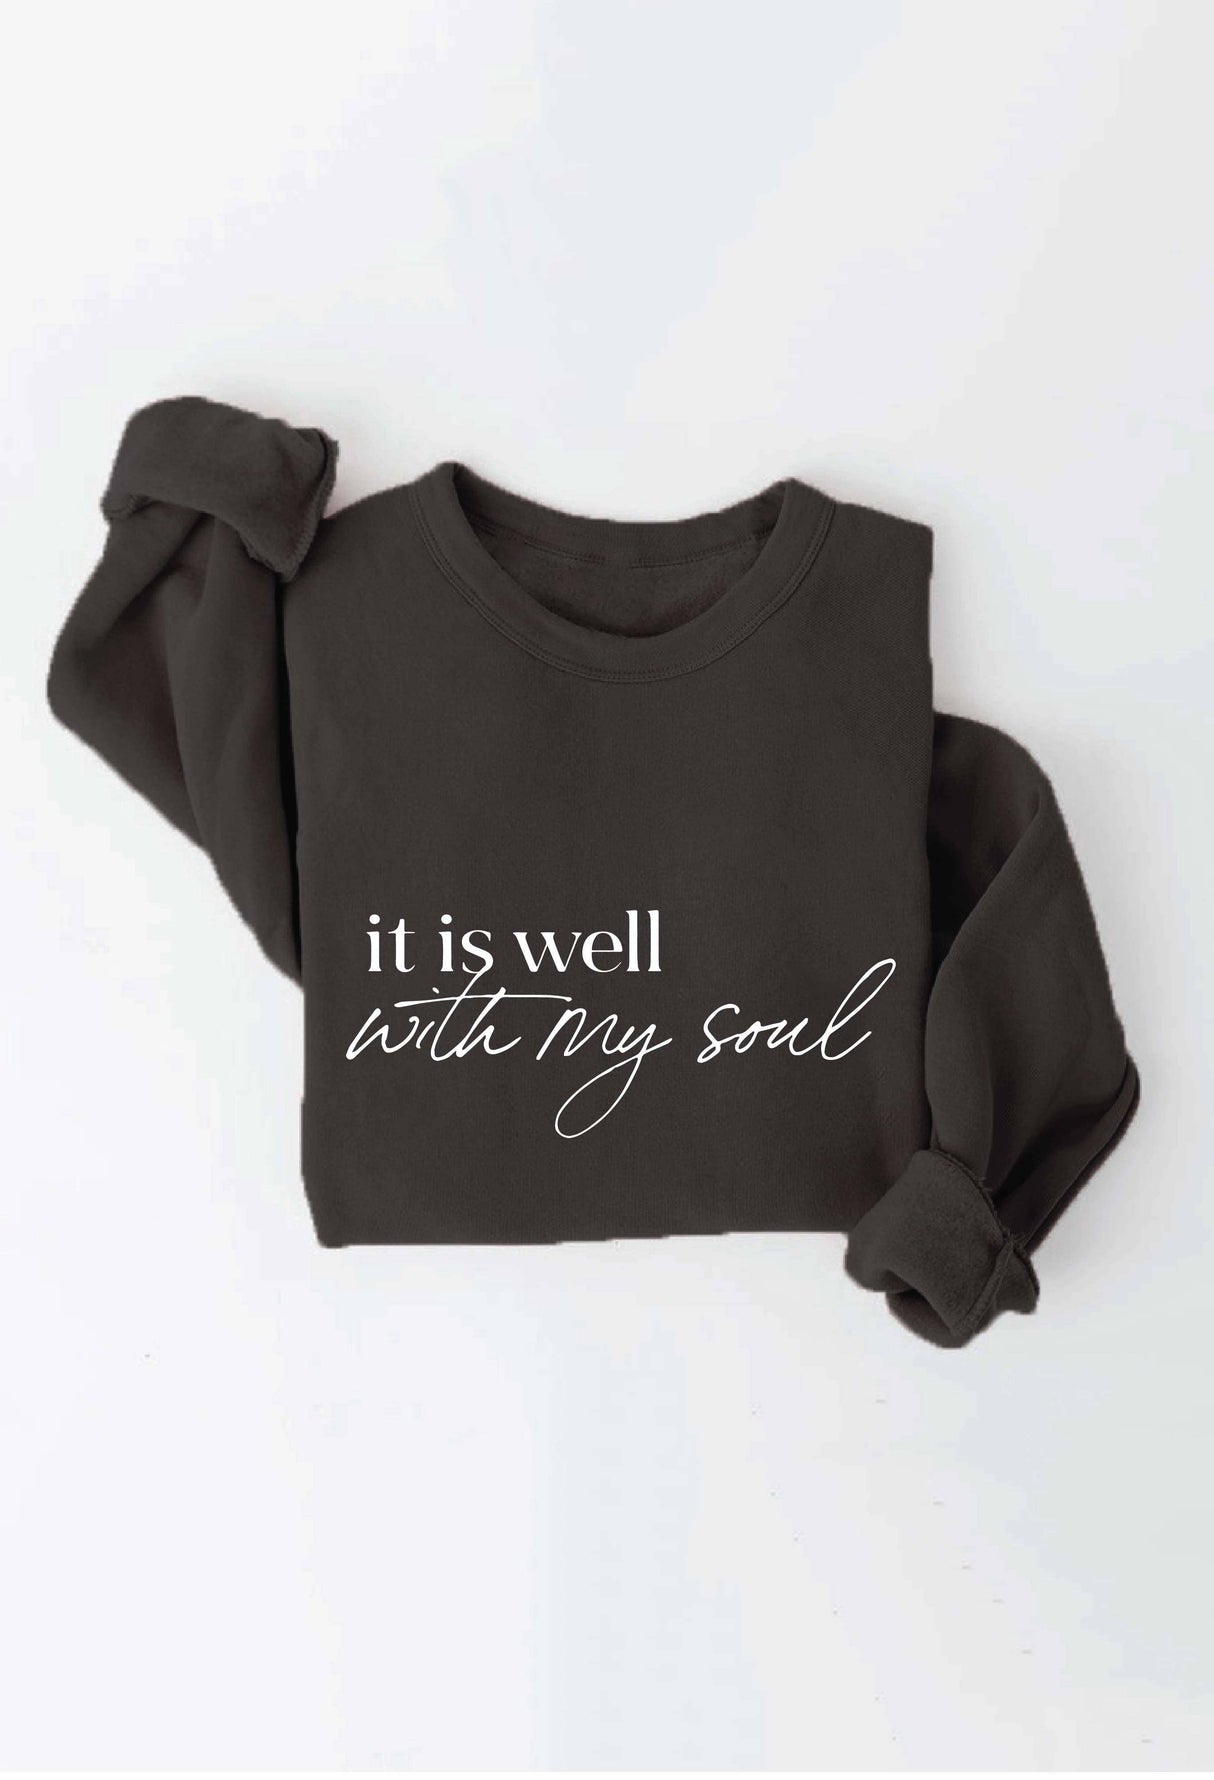 IT IS WELL WITH MY SOUL Graphic Sweatshirt Top